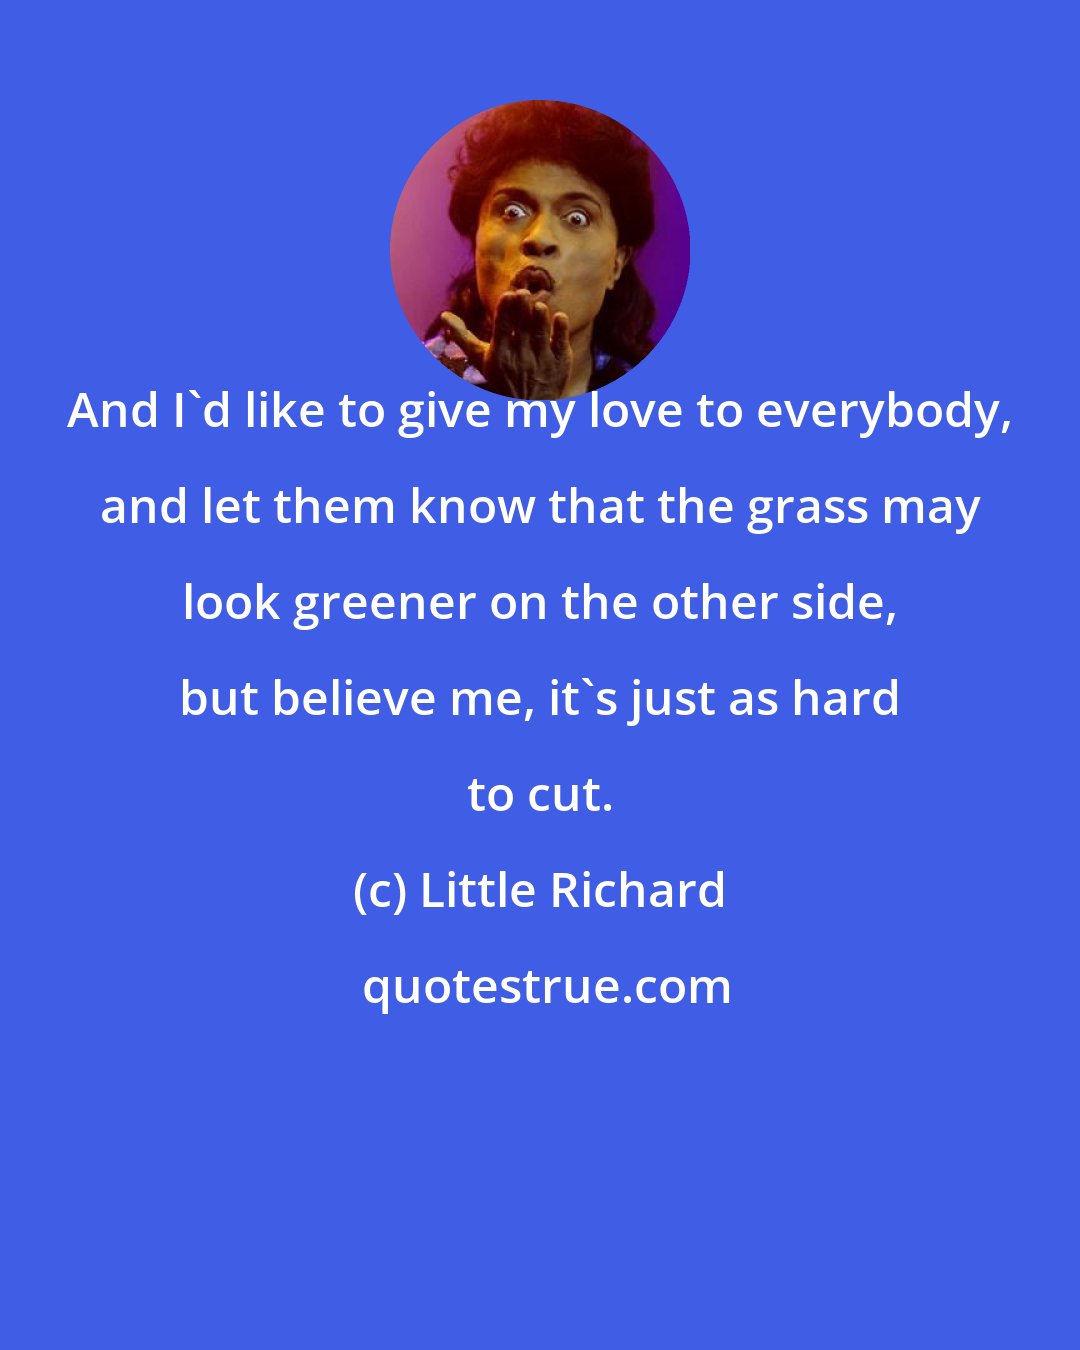 Little Richard: And I'd like to give my love to everybody, and let them know that the grass may look greener on the other side, but believe me, it's just as hard to cut.